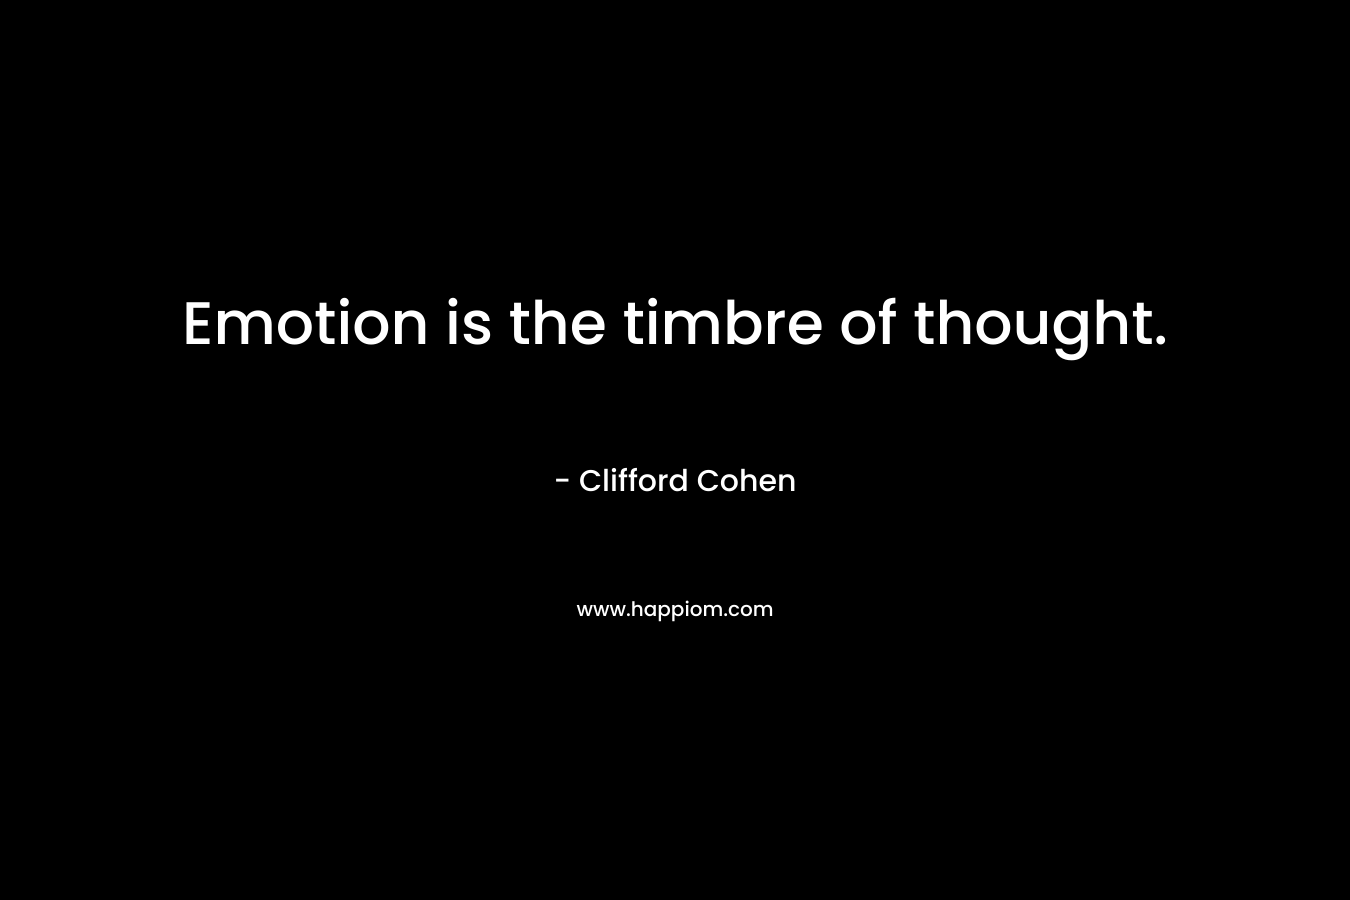 Emotion is the timbre of thought.